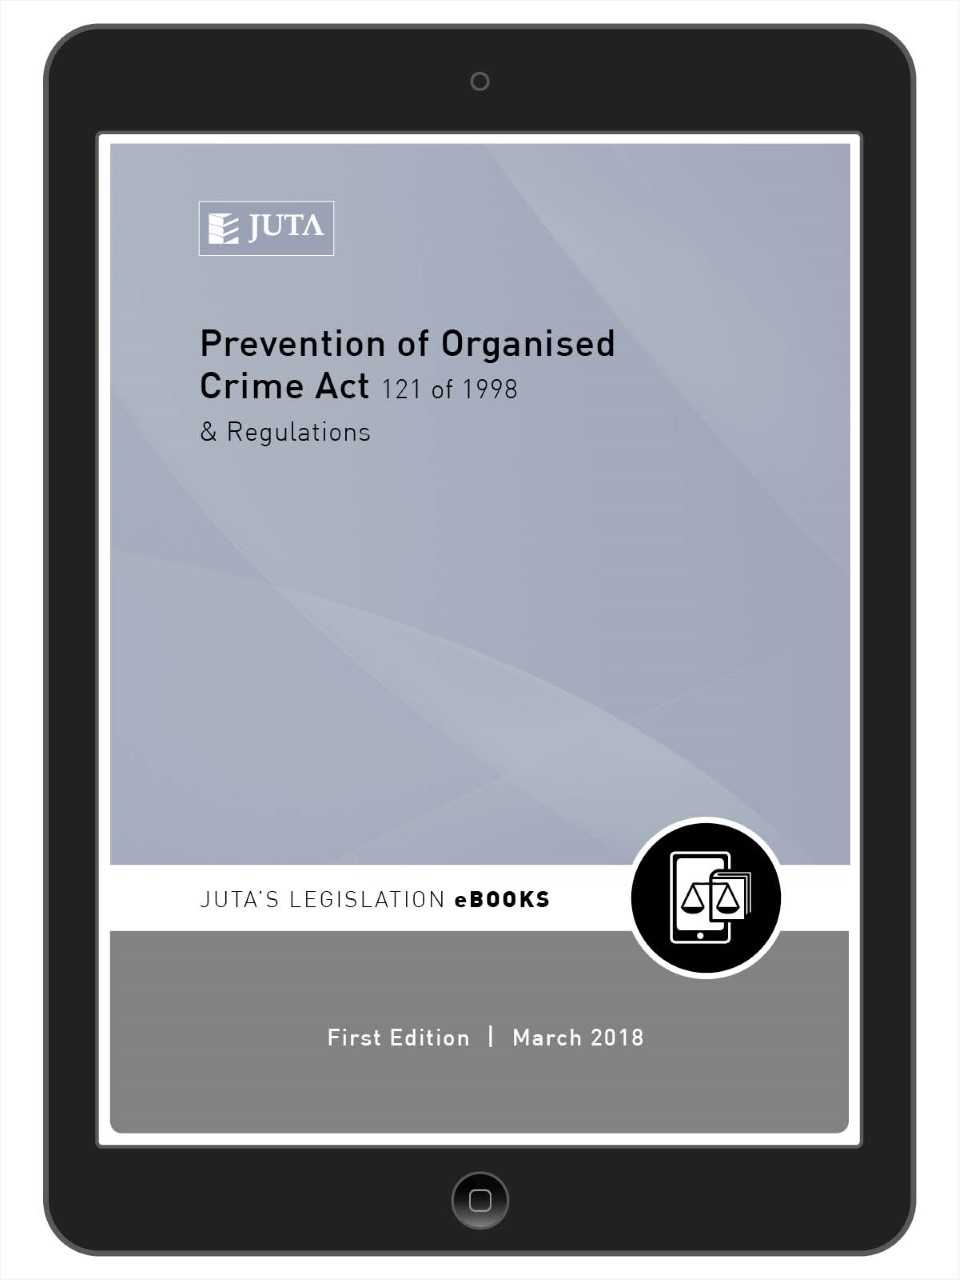 Prevention of Organised Crime Act 121 of 1998 & Regulations